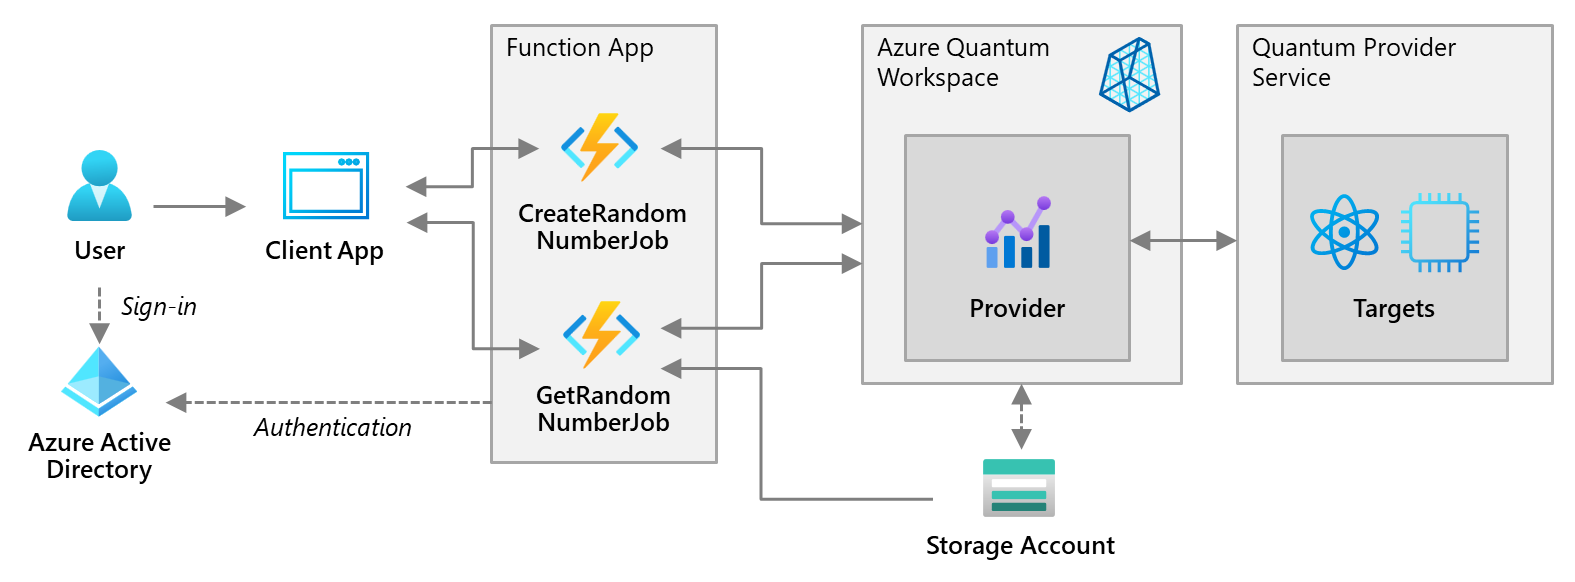 The hybrid sample applications used to illustrate how to implement DevOps for Quantum Computing.